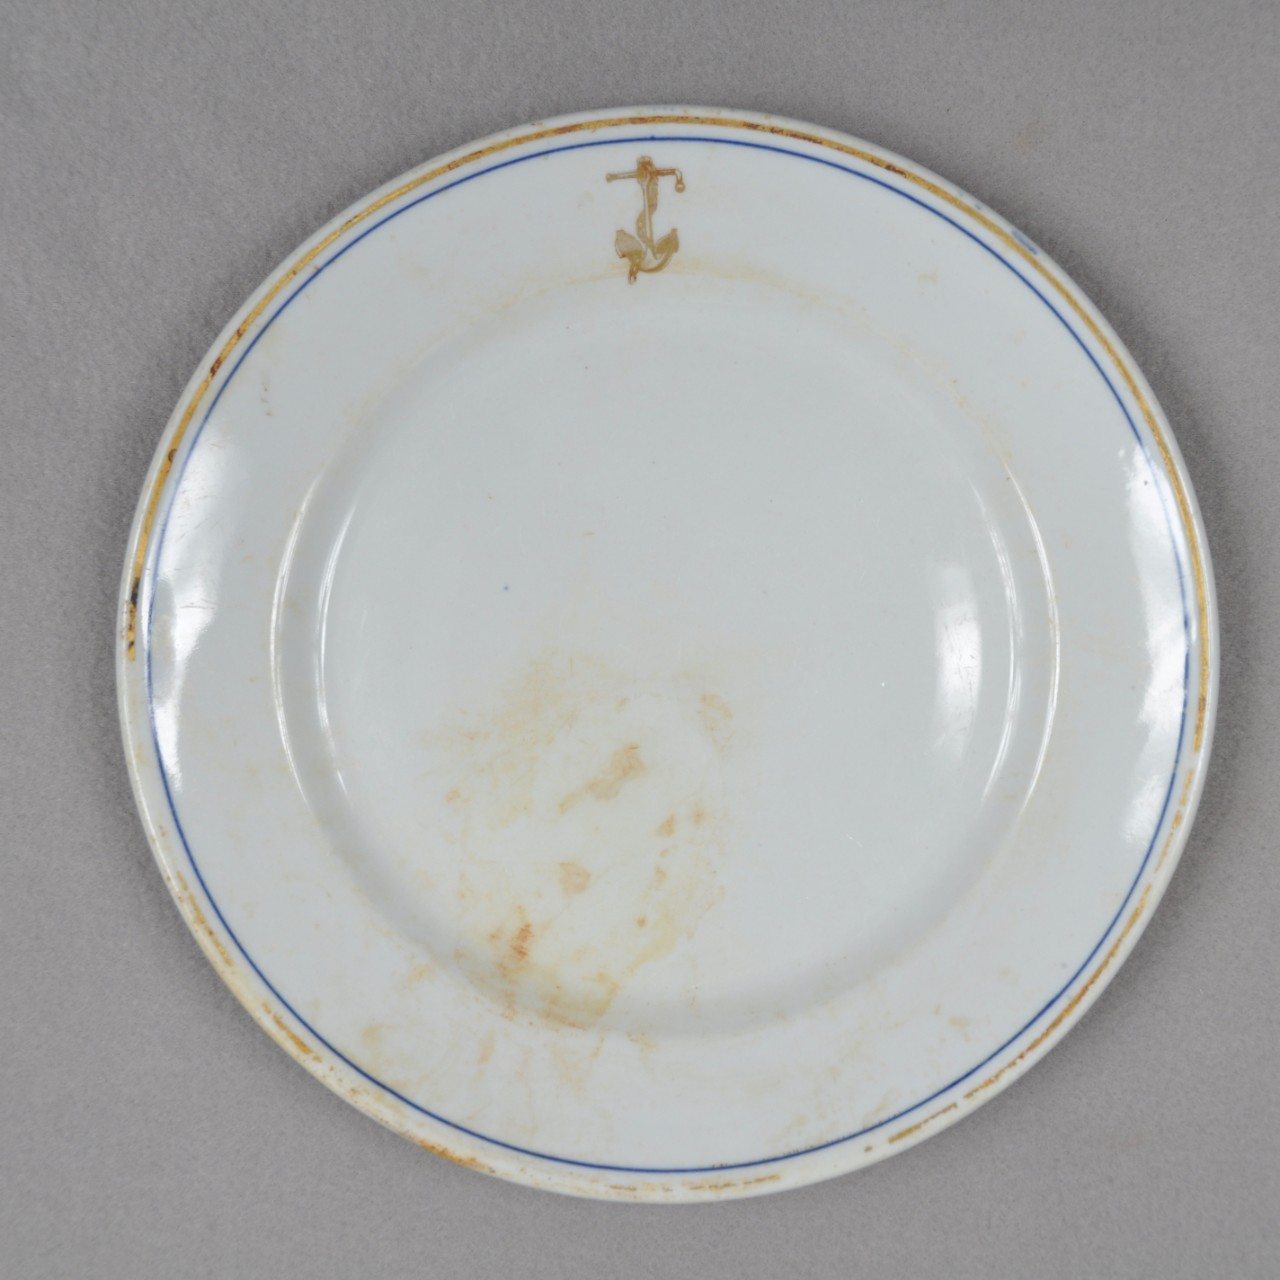 <p>A white ceramic plate with a gold ring and blue ring around the edge. There is also a golden anchor with a chain around it on the lip.</p>